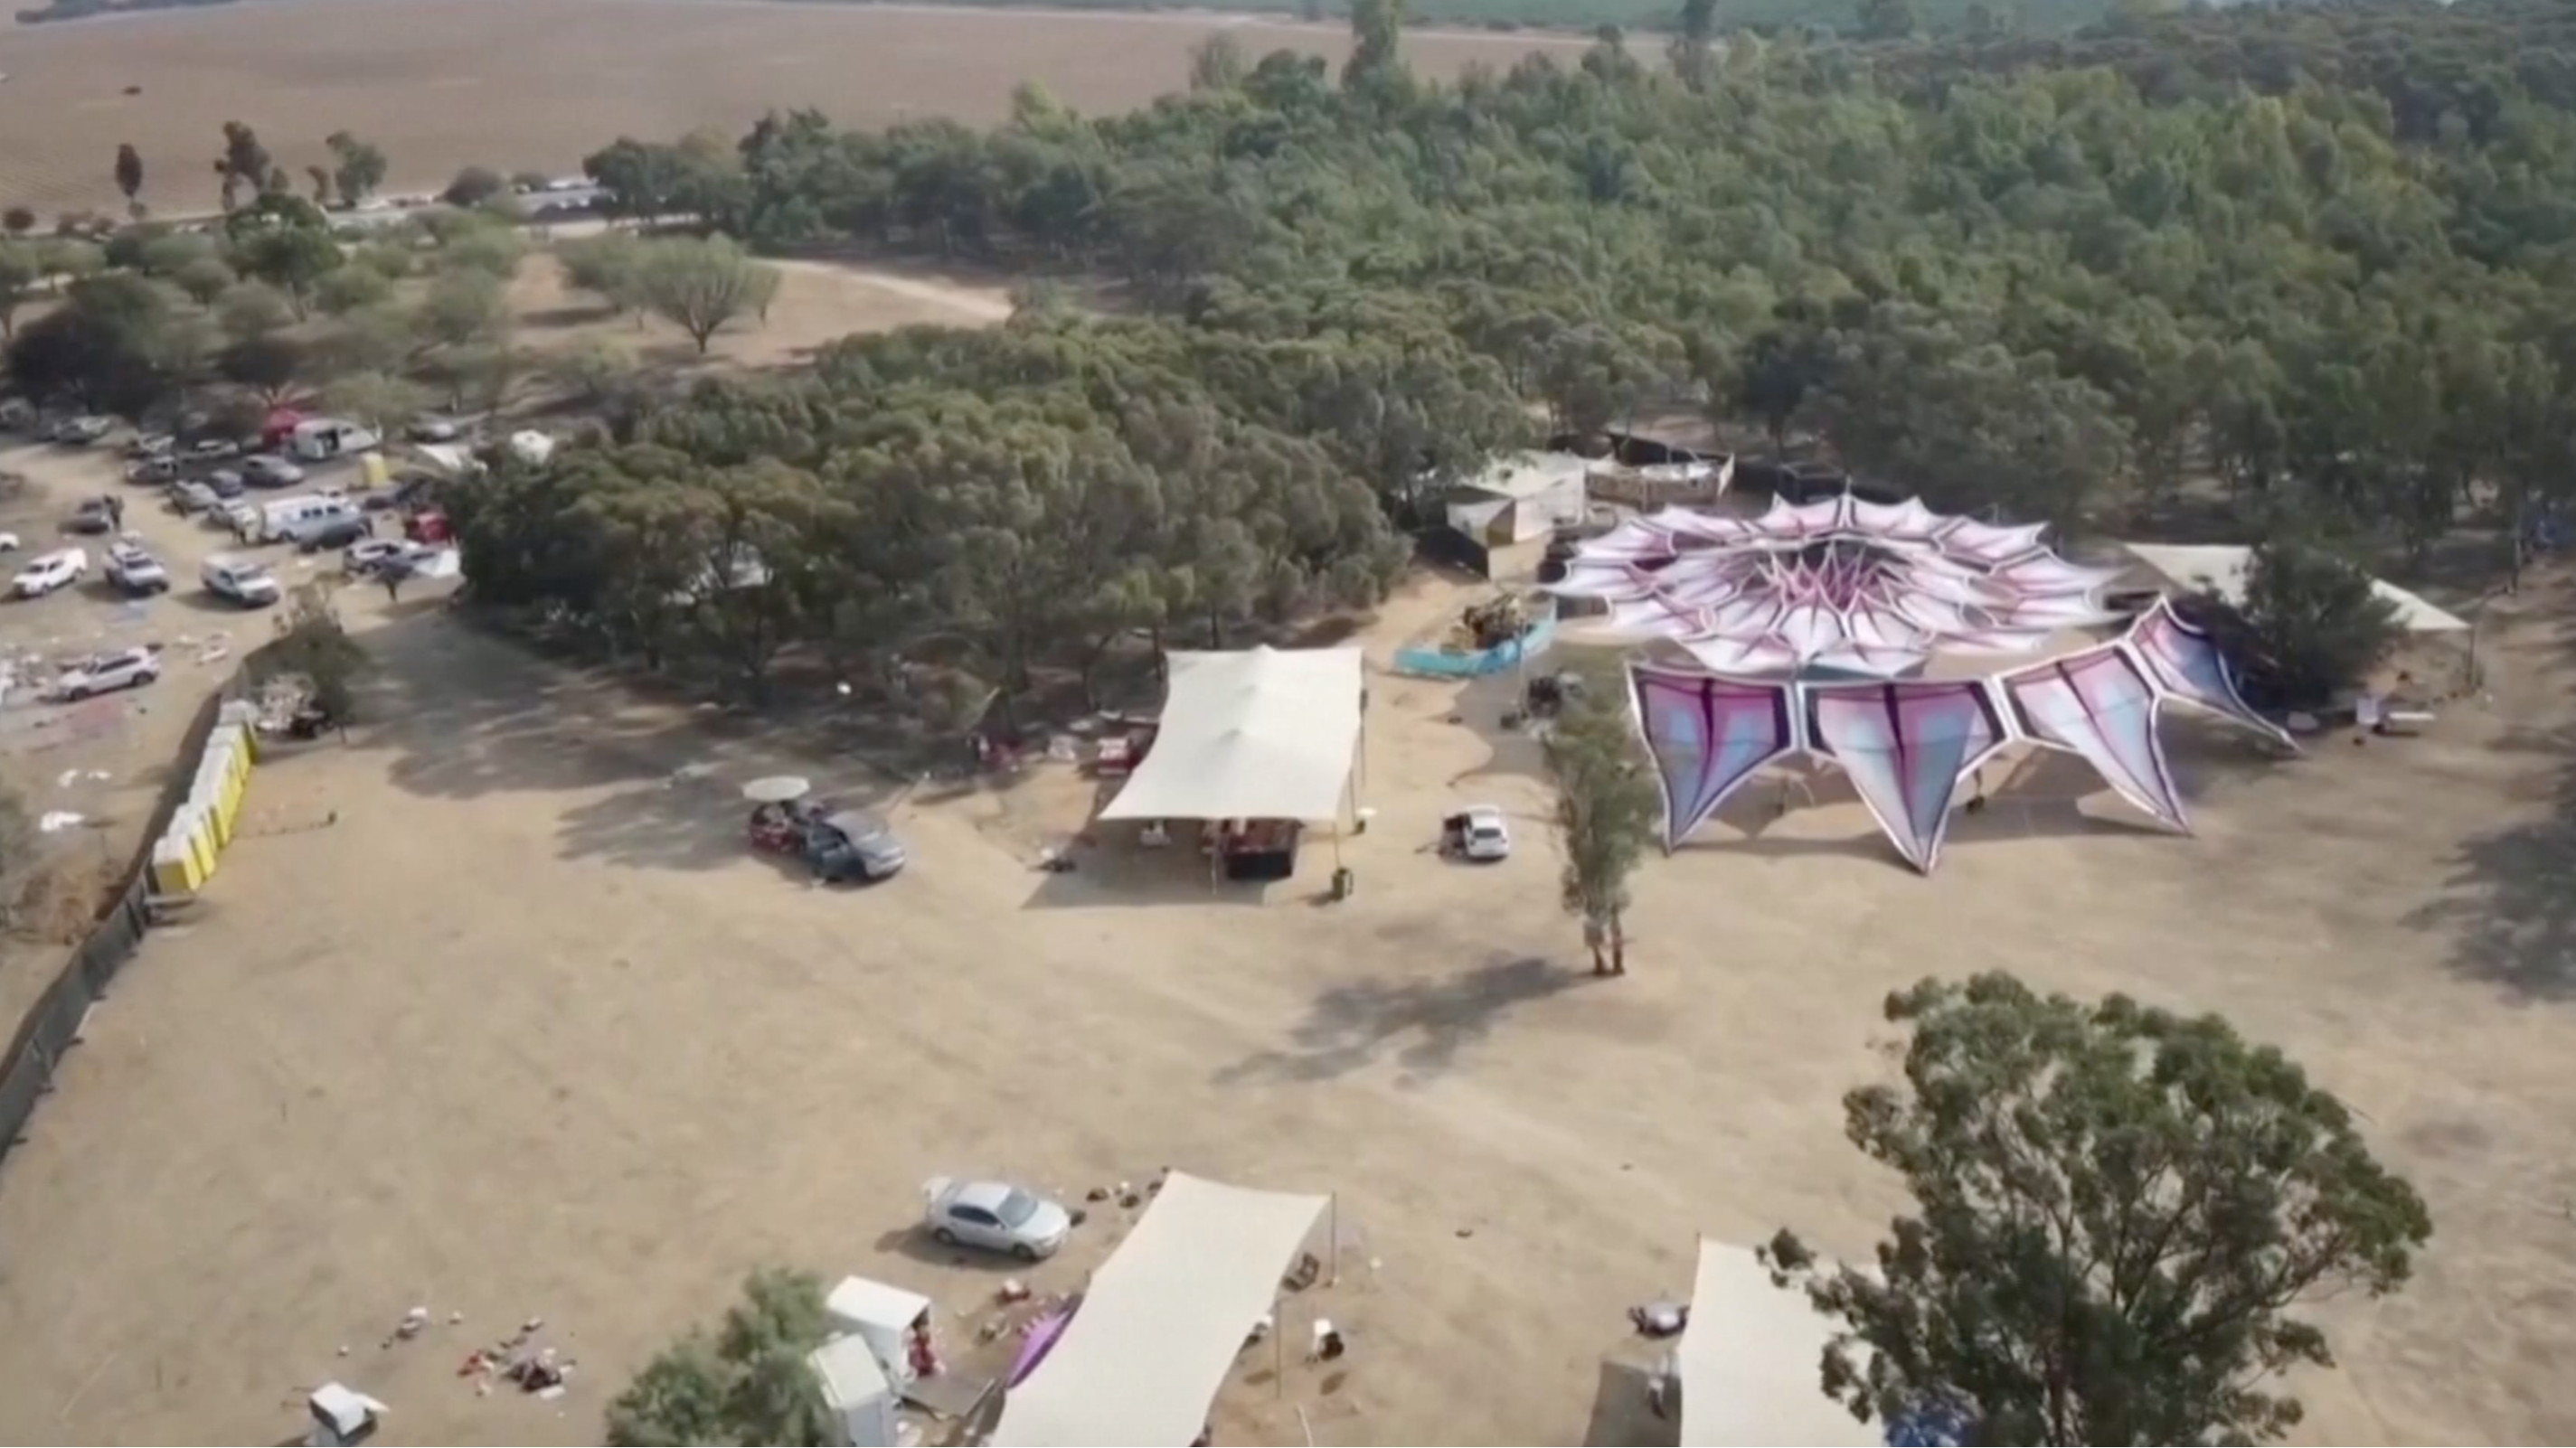 Drone footage captures the aftermath of Hamas’s attack on the Supernova music festival